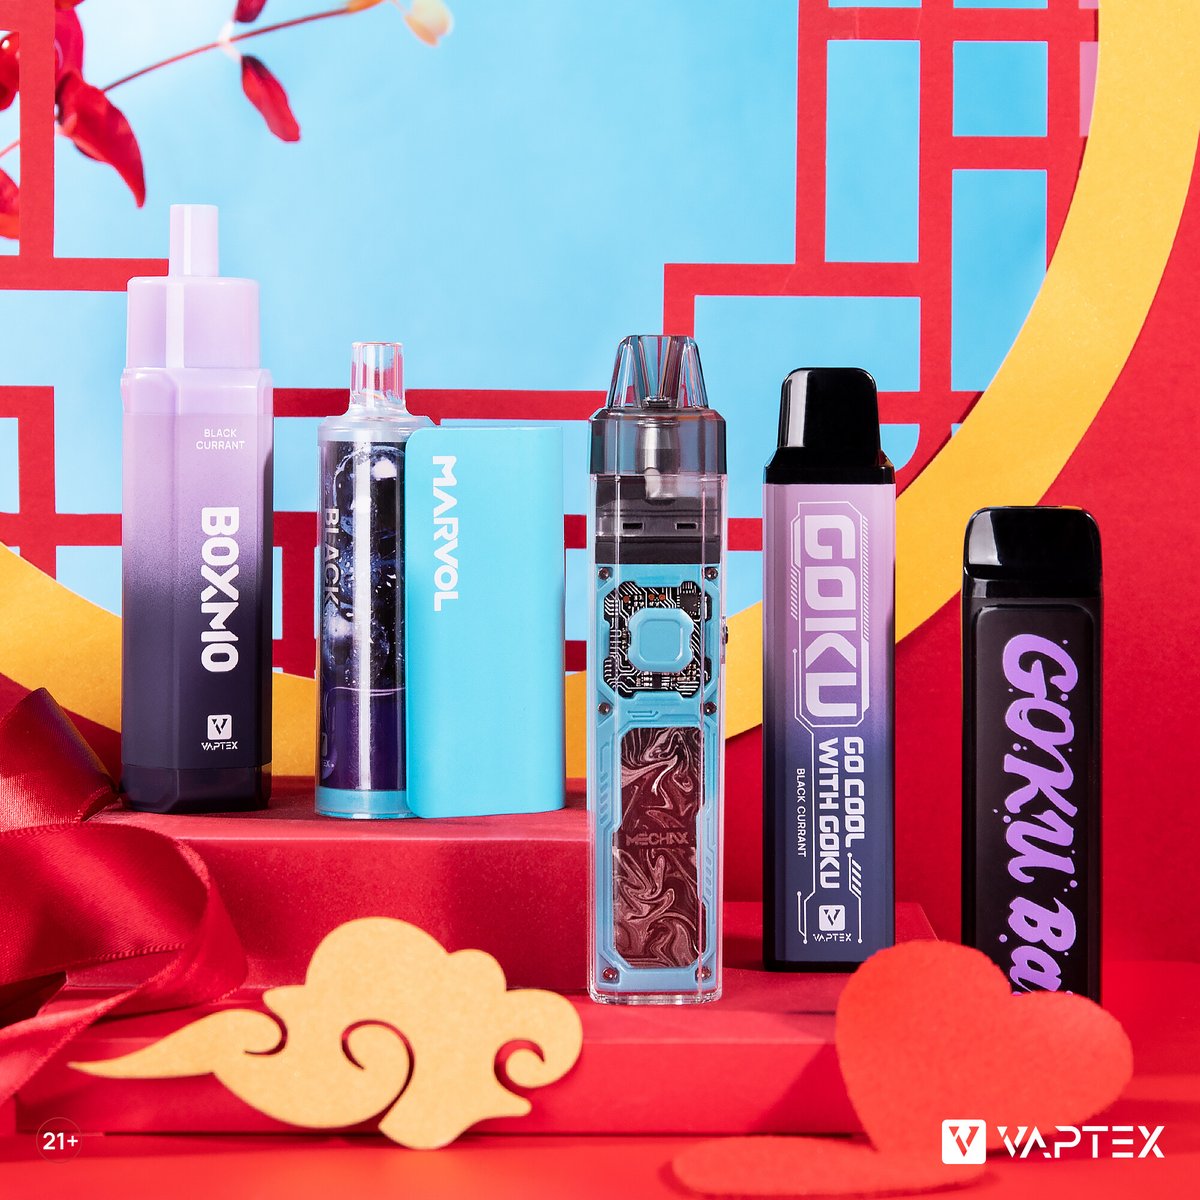 Which #Vaptex device do you like most last year? . vaptexworld.com . 🚫Warning: This product contains NICOTINE. Nicotine is an addictive chemical.⁠ For Adult Use Only! . #Vaptexvape #pod #vapepen #mtl #ecigs #vapers #vapebar #